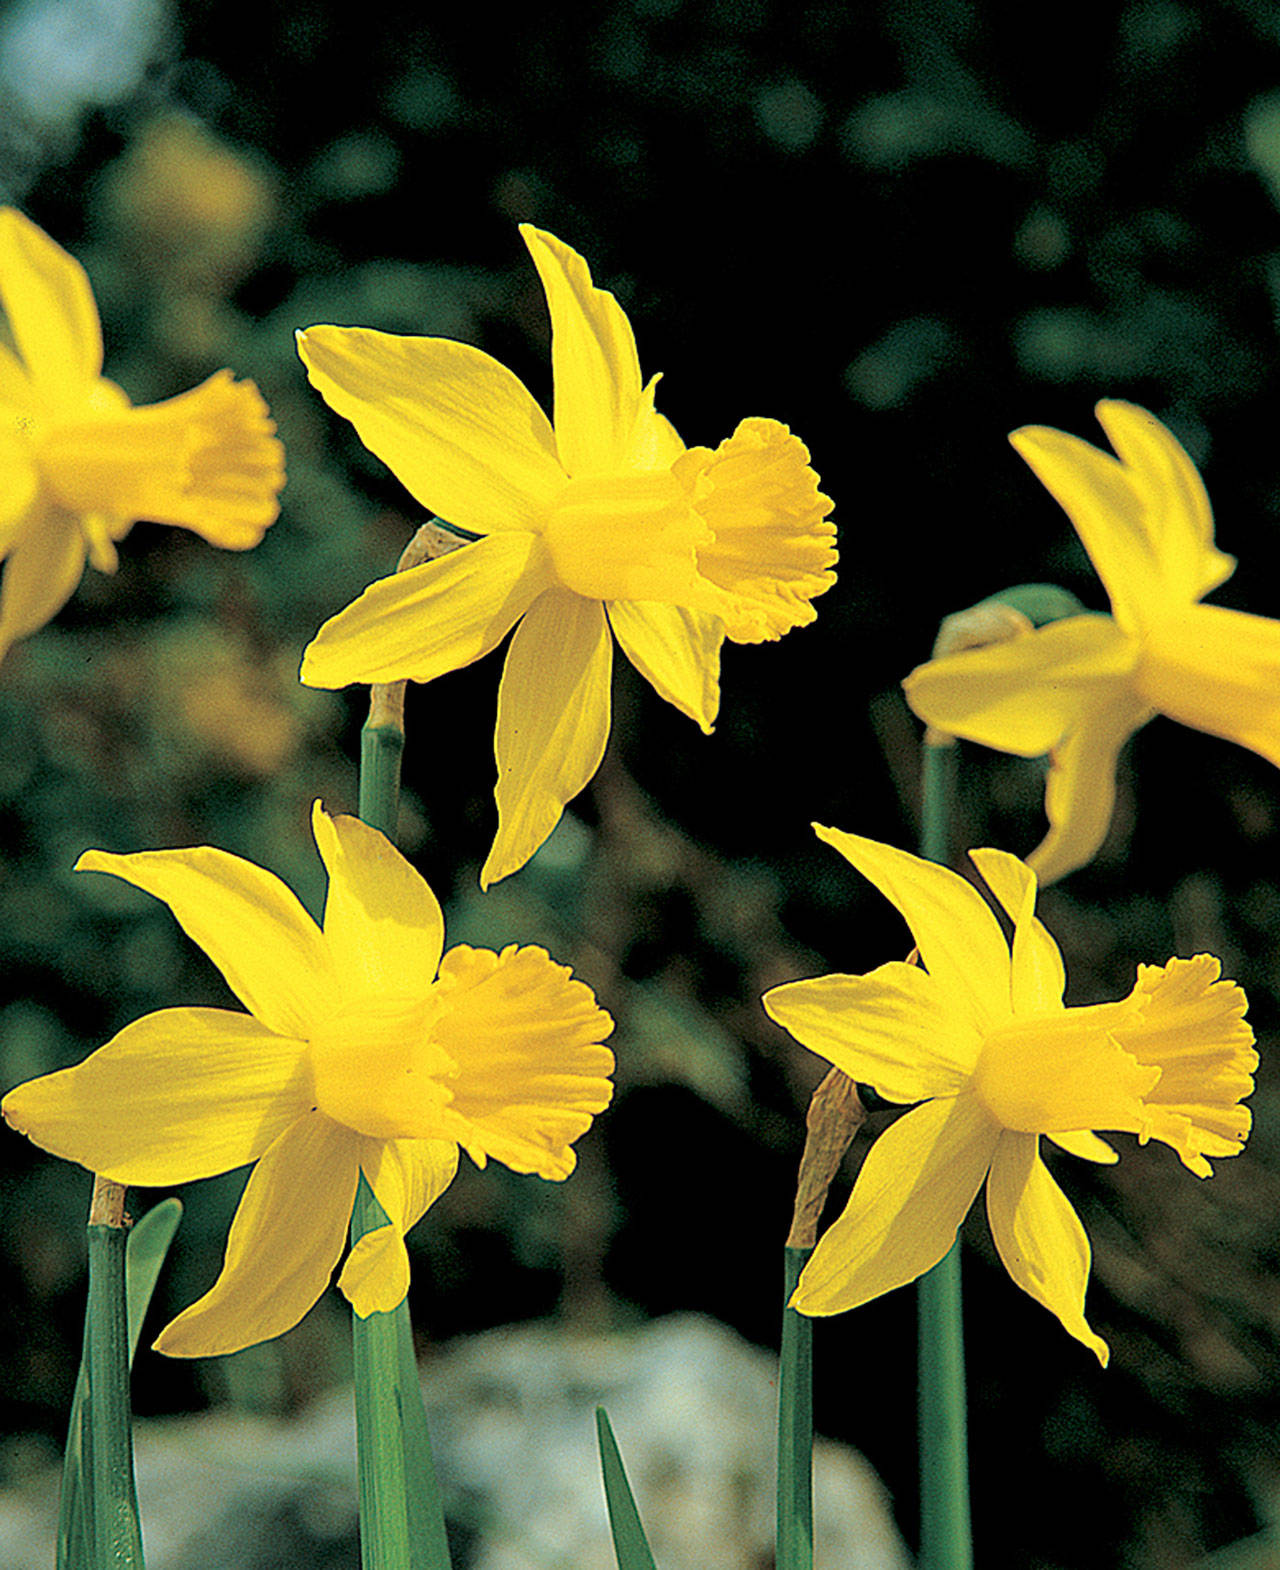 The February gold daffodil is a misnomer for the kind of weather we’ve been having this year. (Richie Steffen photo)